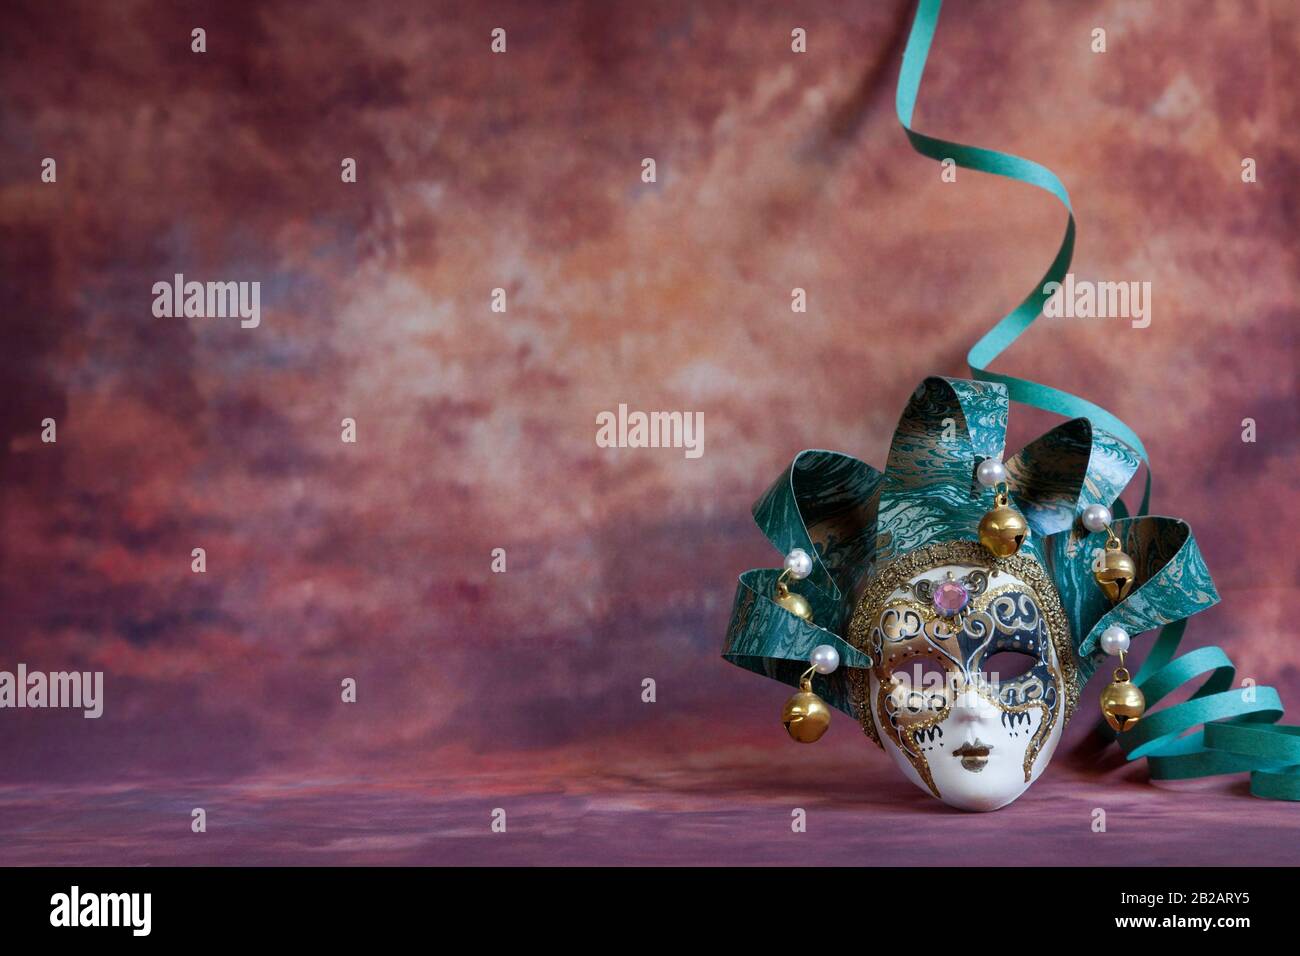 venetian carnival mask and serpentine on brown fantasy background. Stock Photo